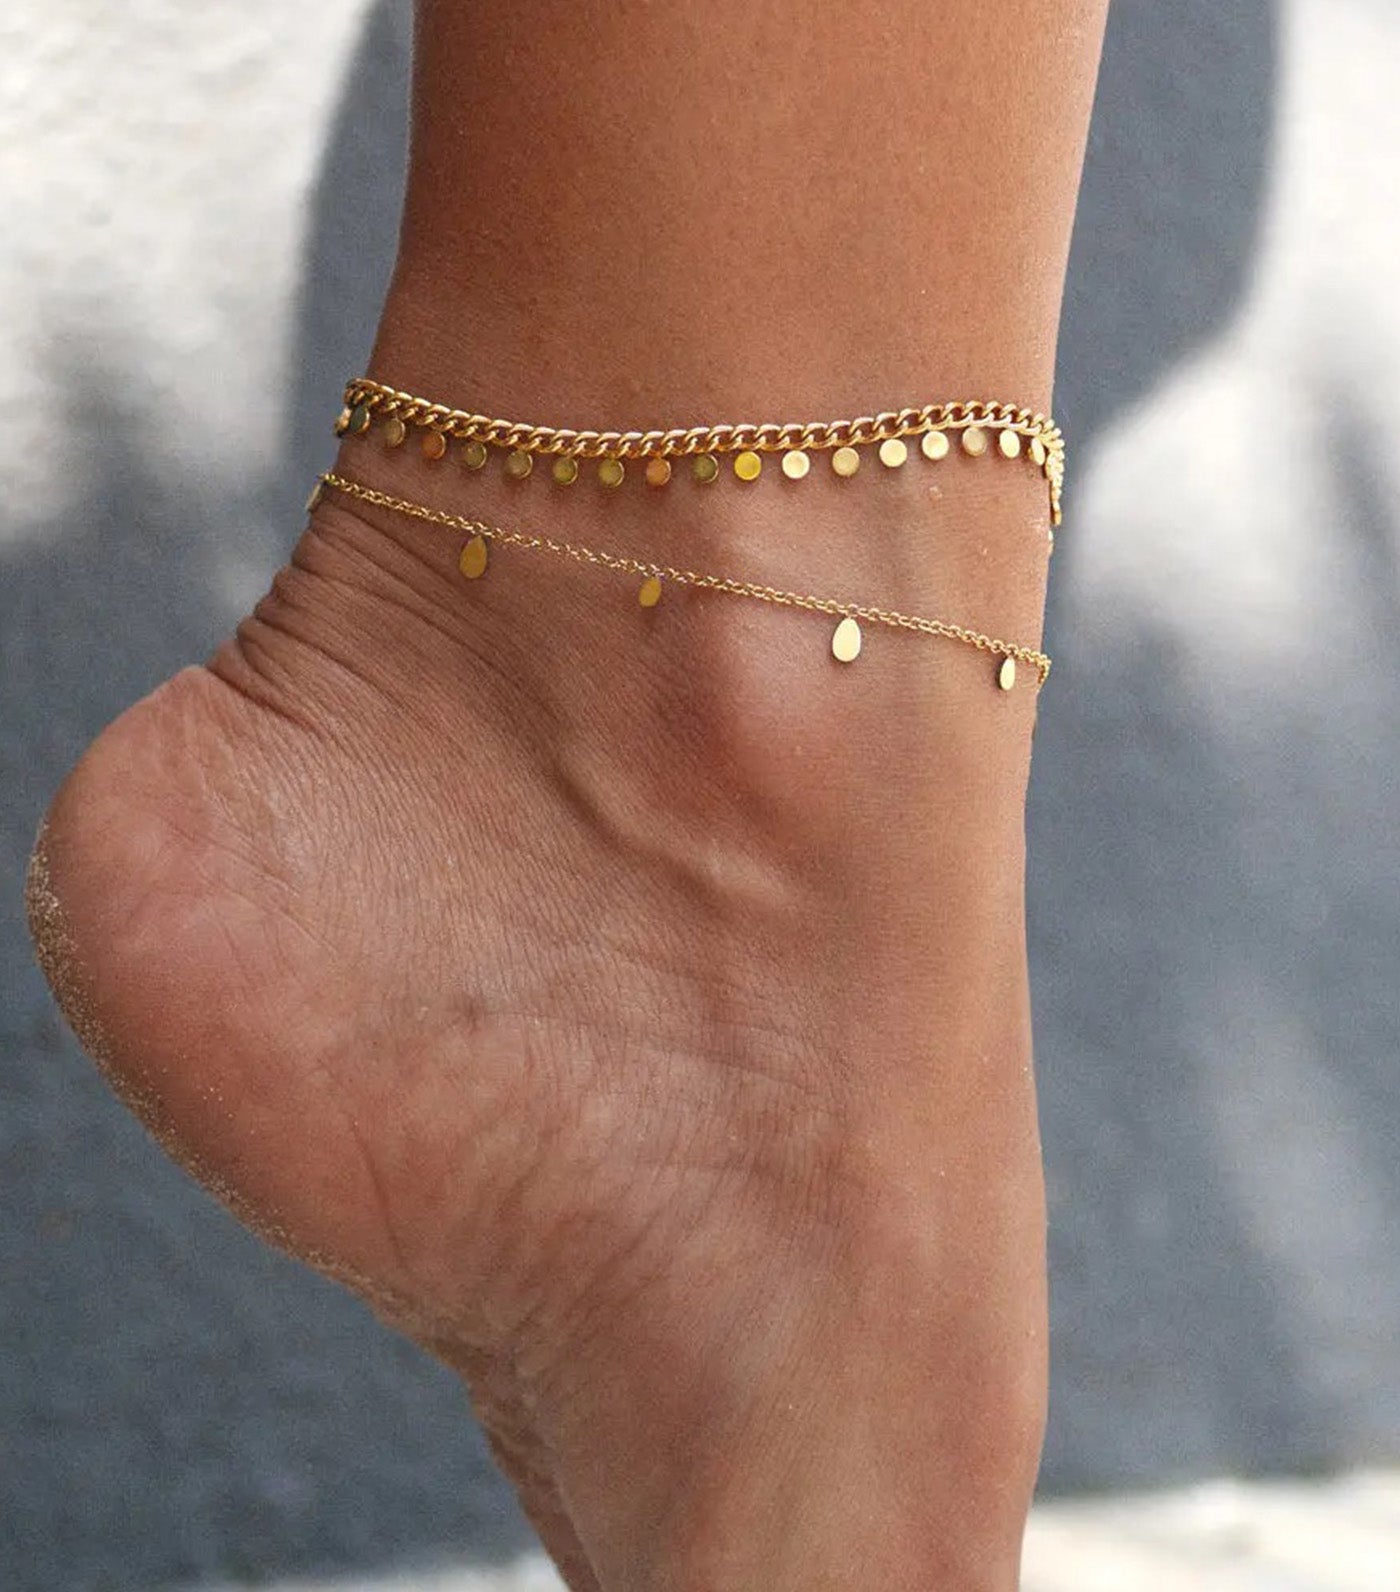 Lia Tiny Oval Anklet Stainless Steel Gold